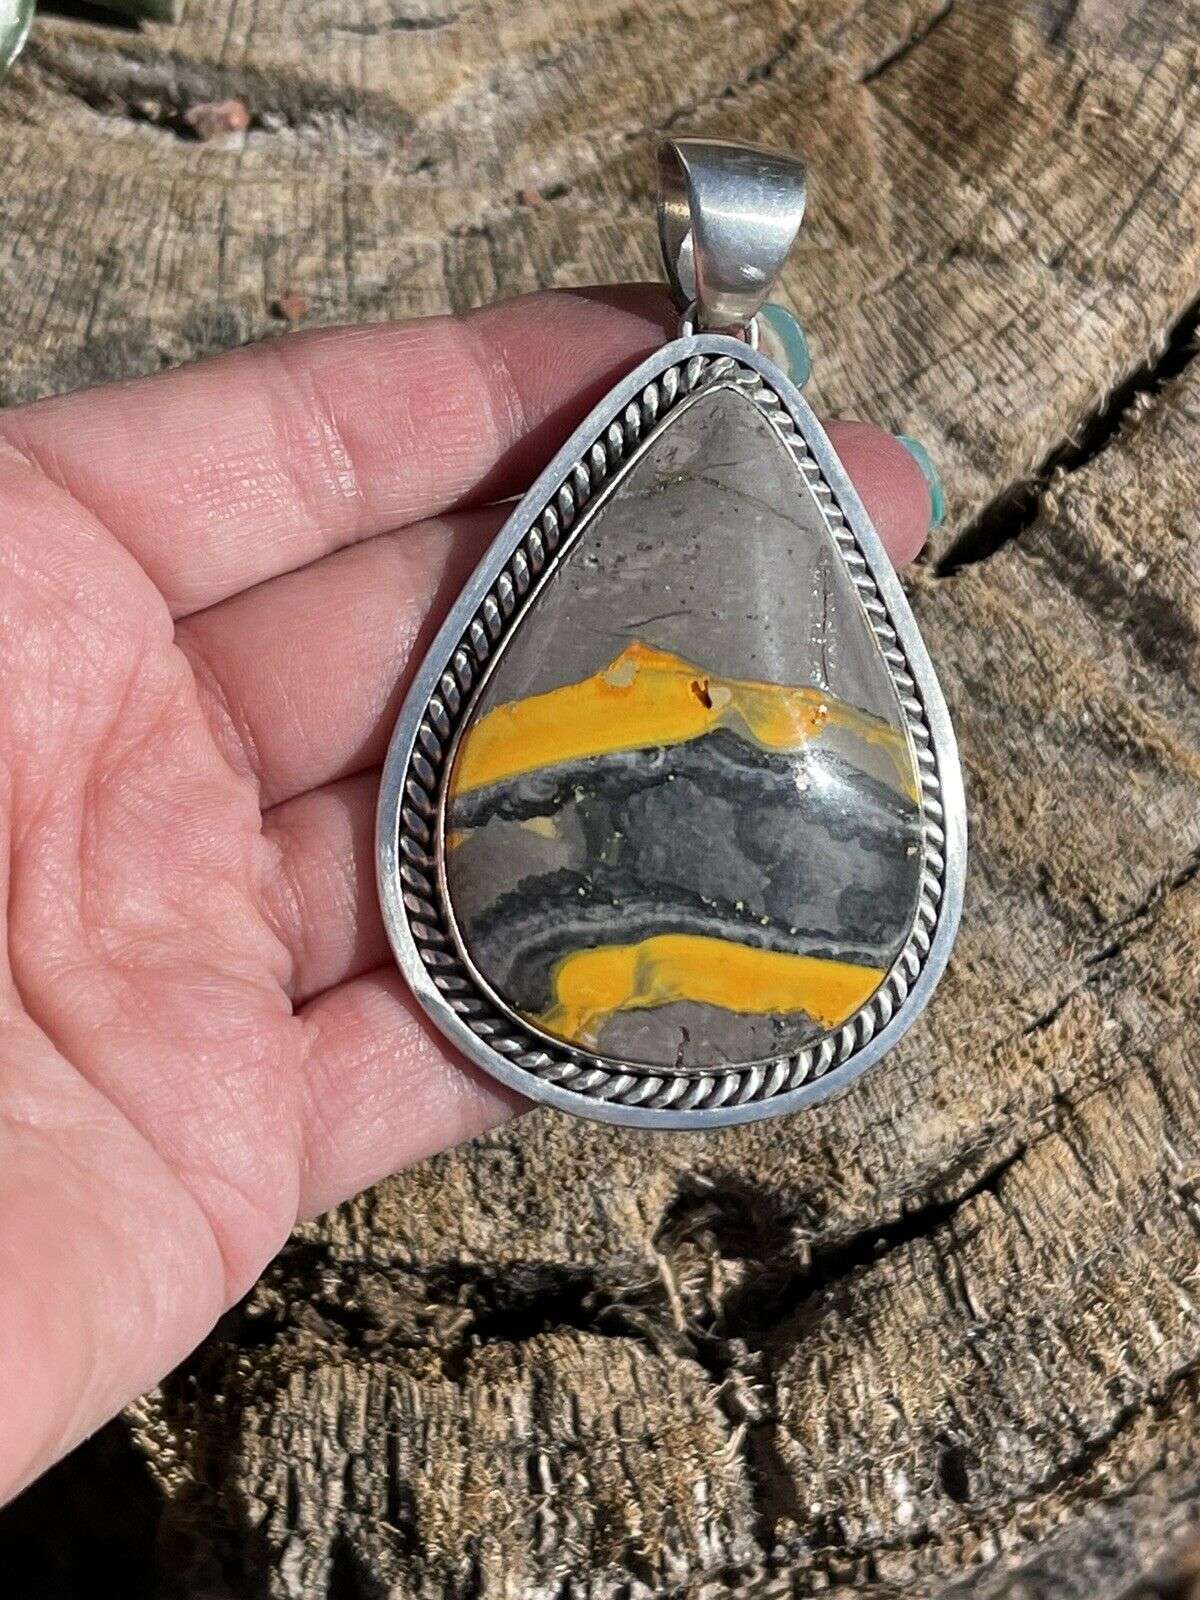 Navajo Bumble Bee Jasper & Sterling Silver Pendant Signed